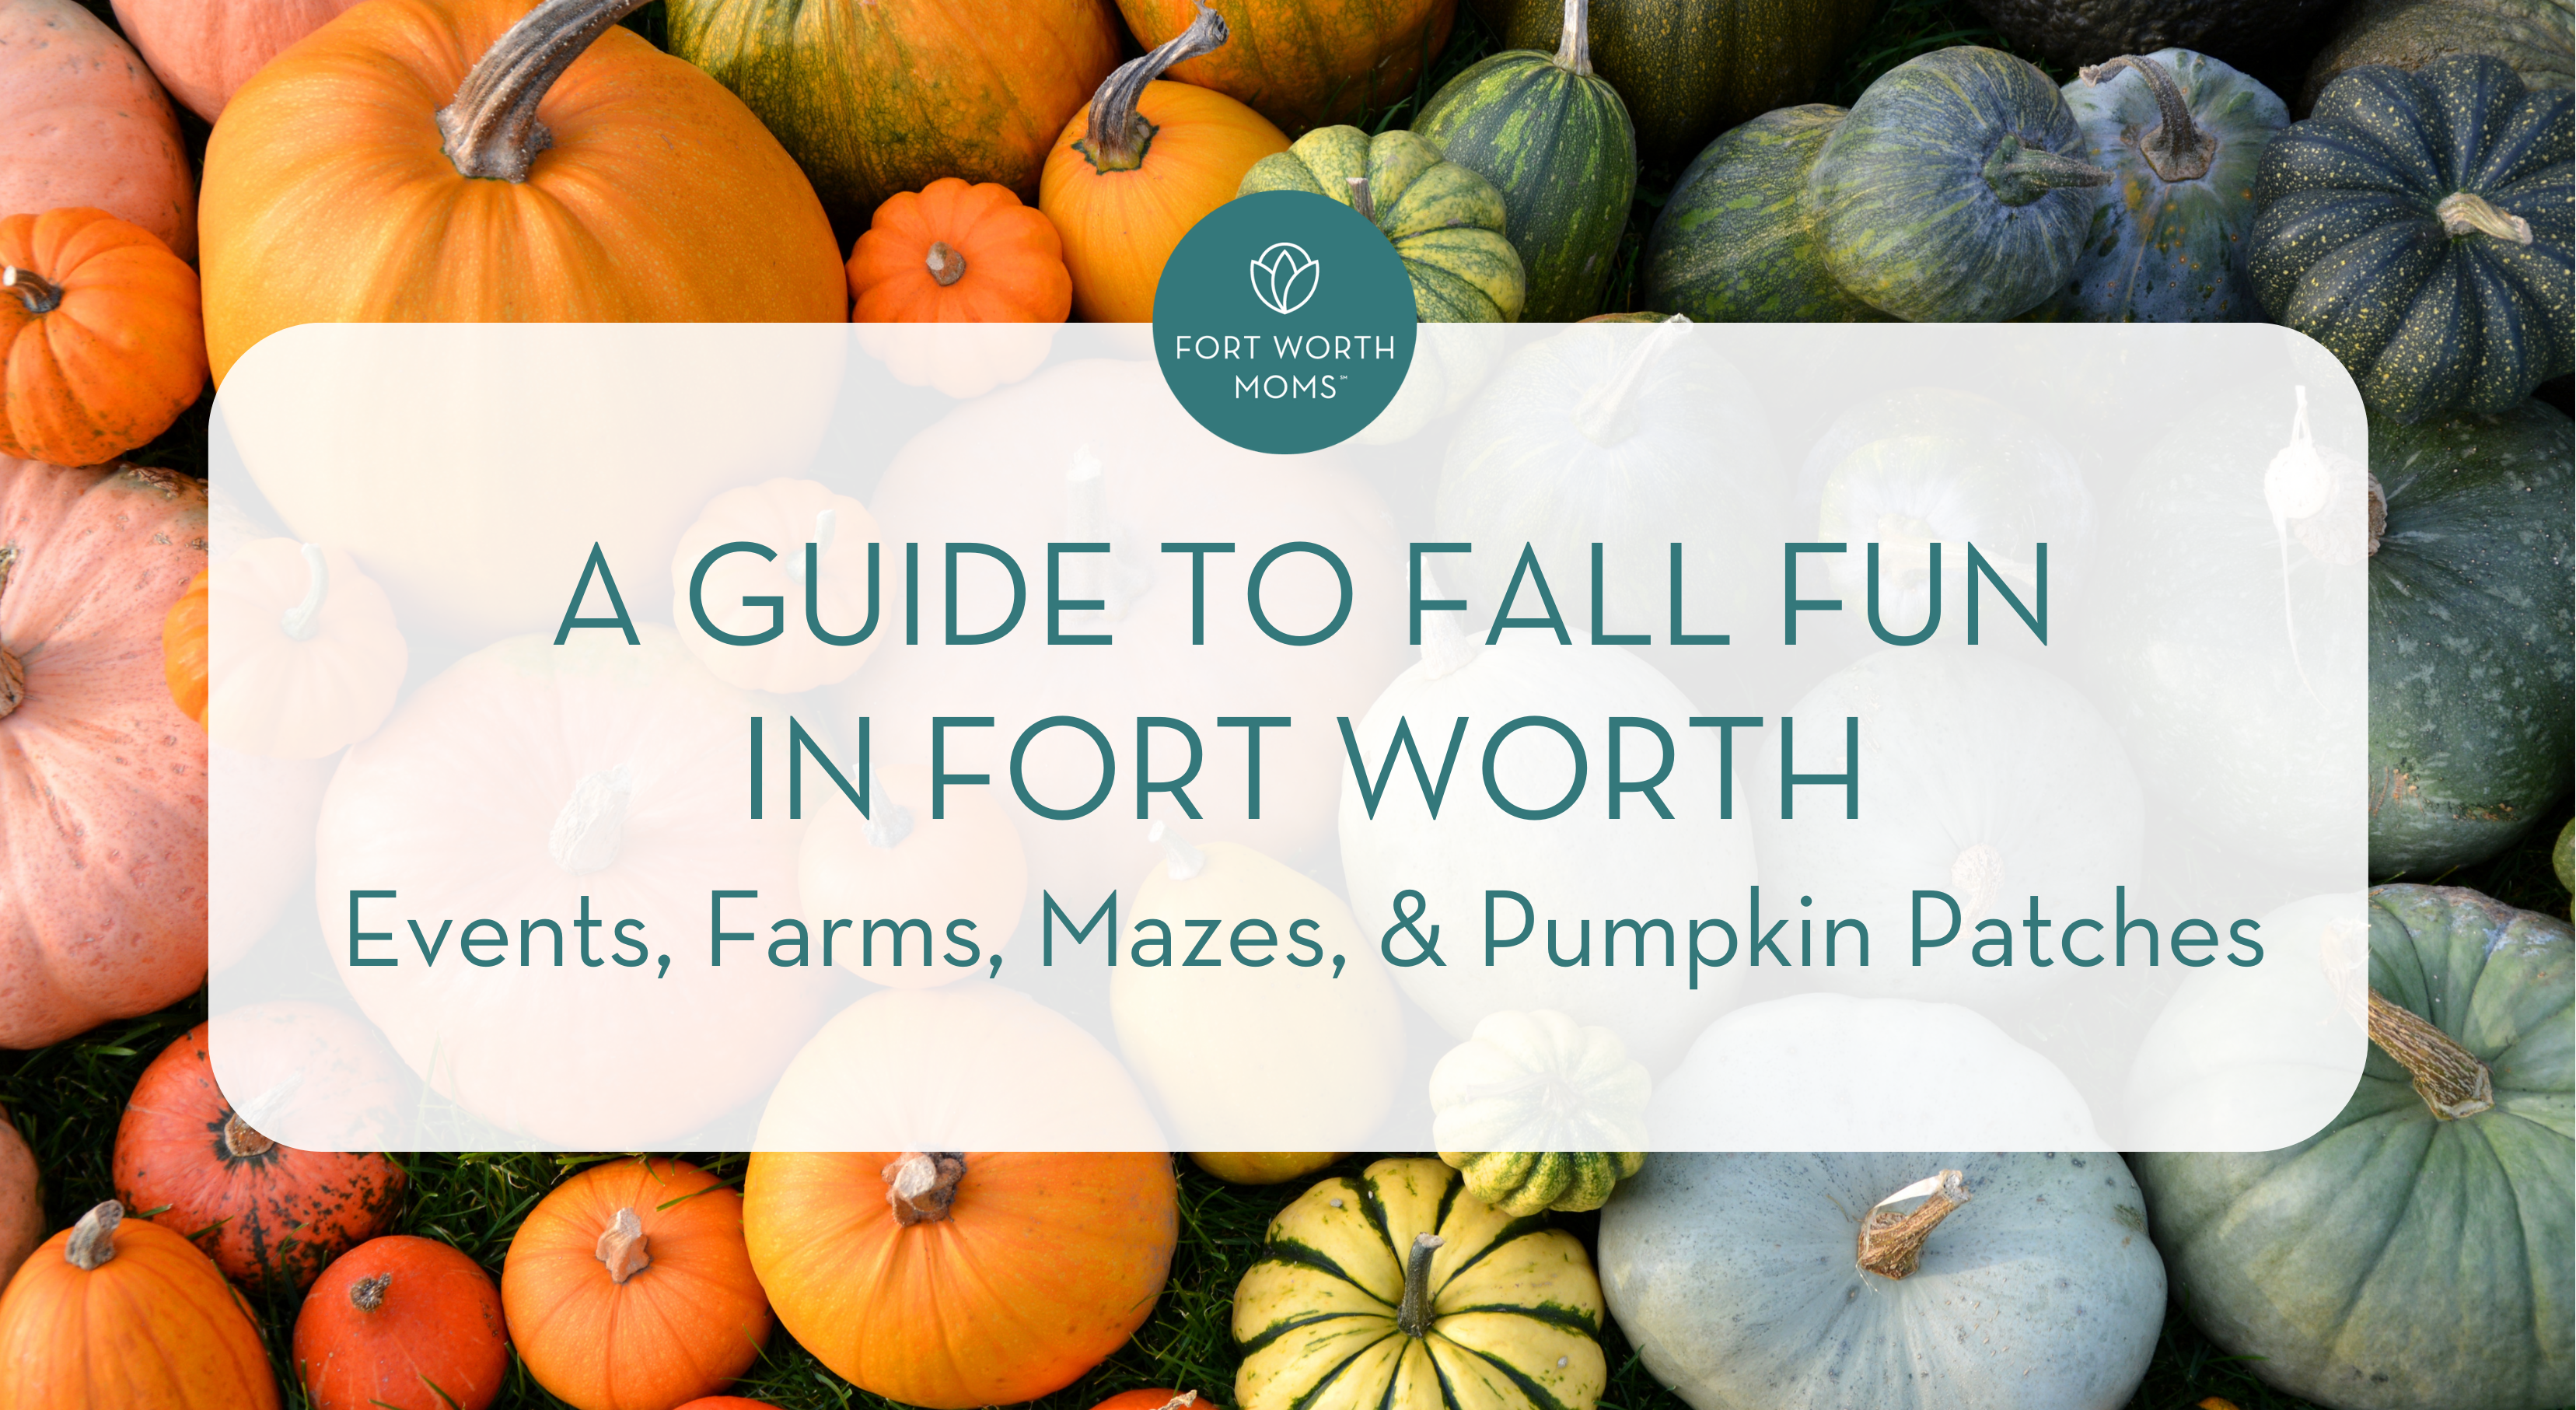 A Guide to Fall Fun in Fort Worth :: Events, Farms, Mazes, and Pumpkin Patches